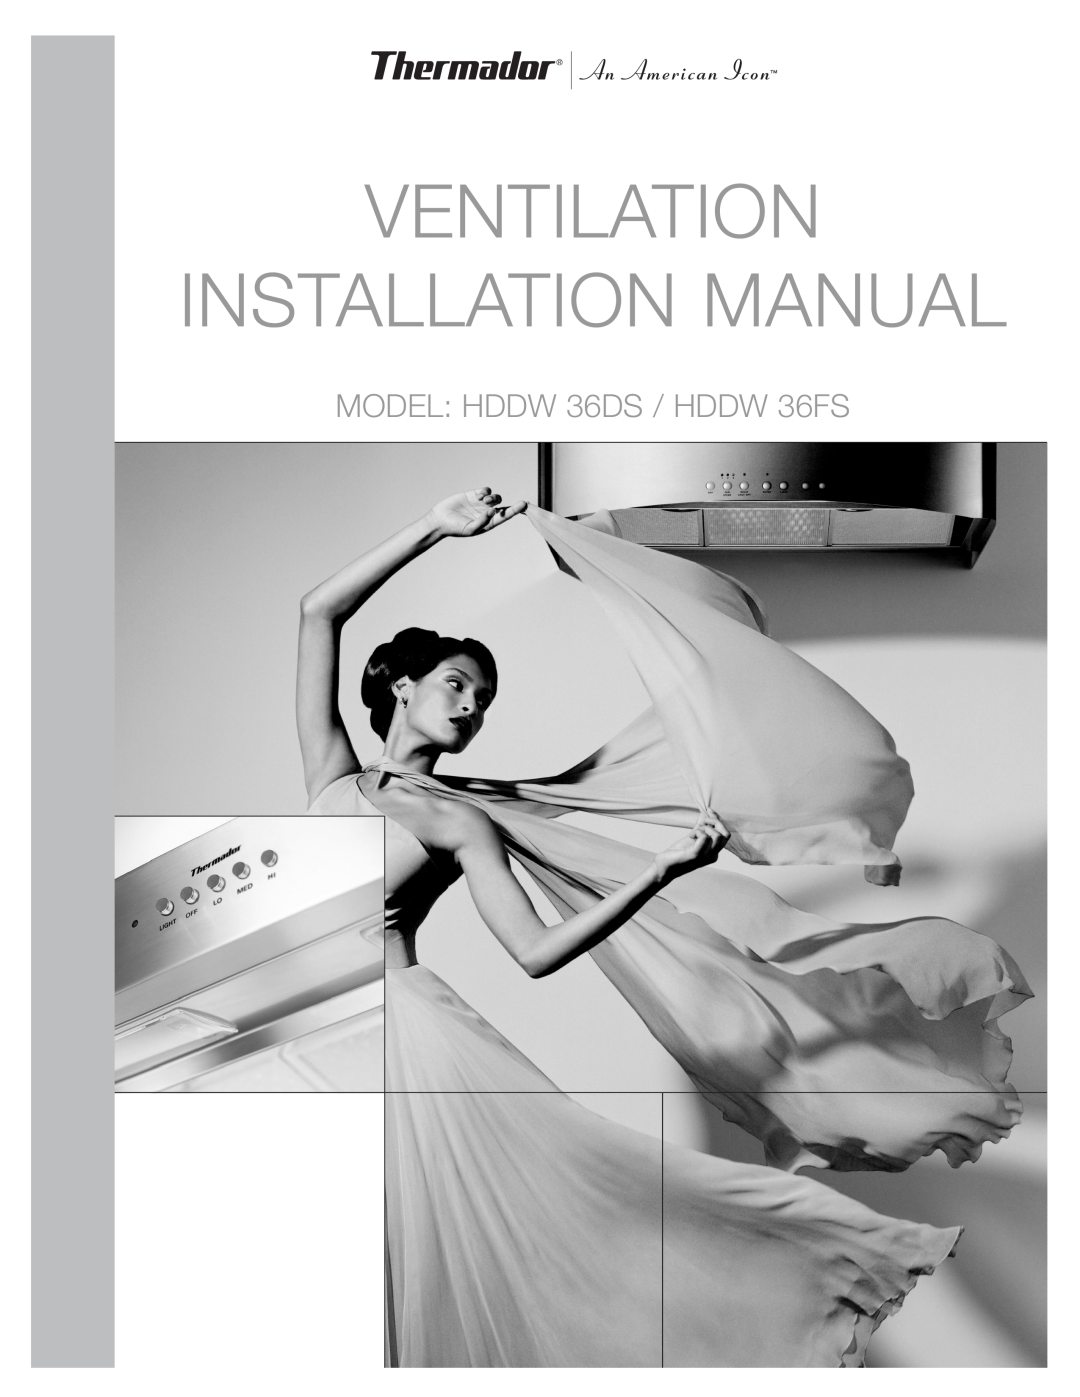 Thermador HDDW36FS installation manual Ventilventilationation, Instalinstallationation Mamanualal 